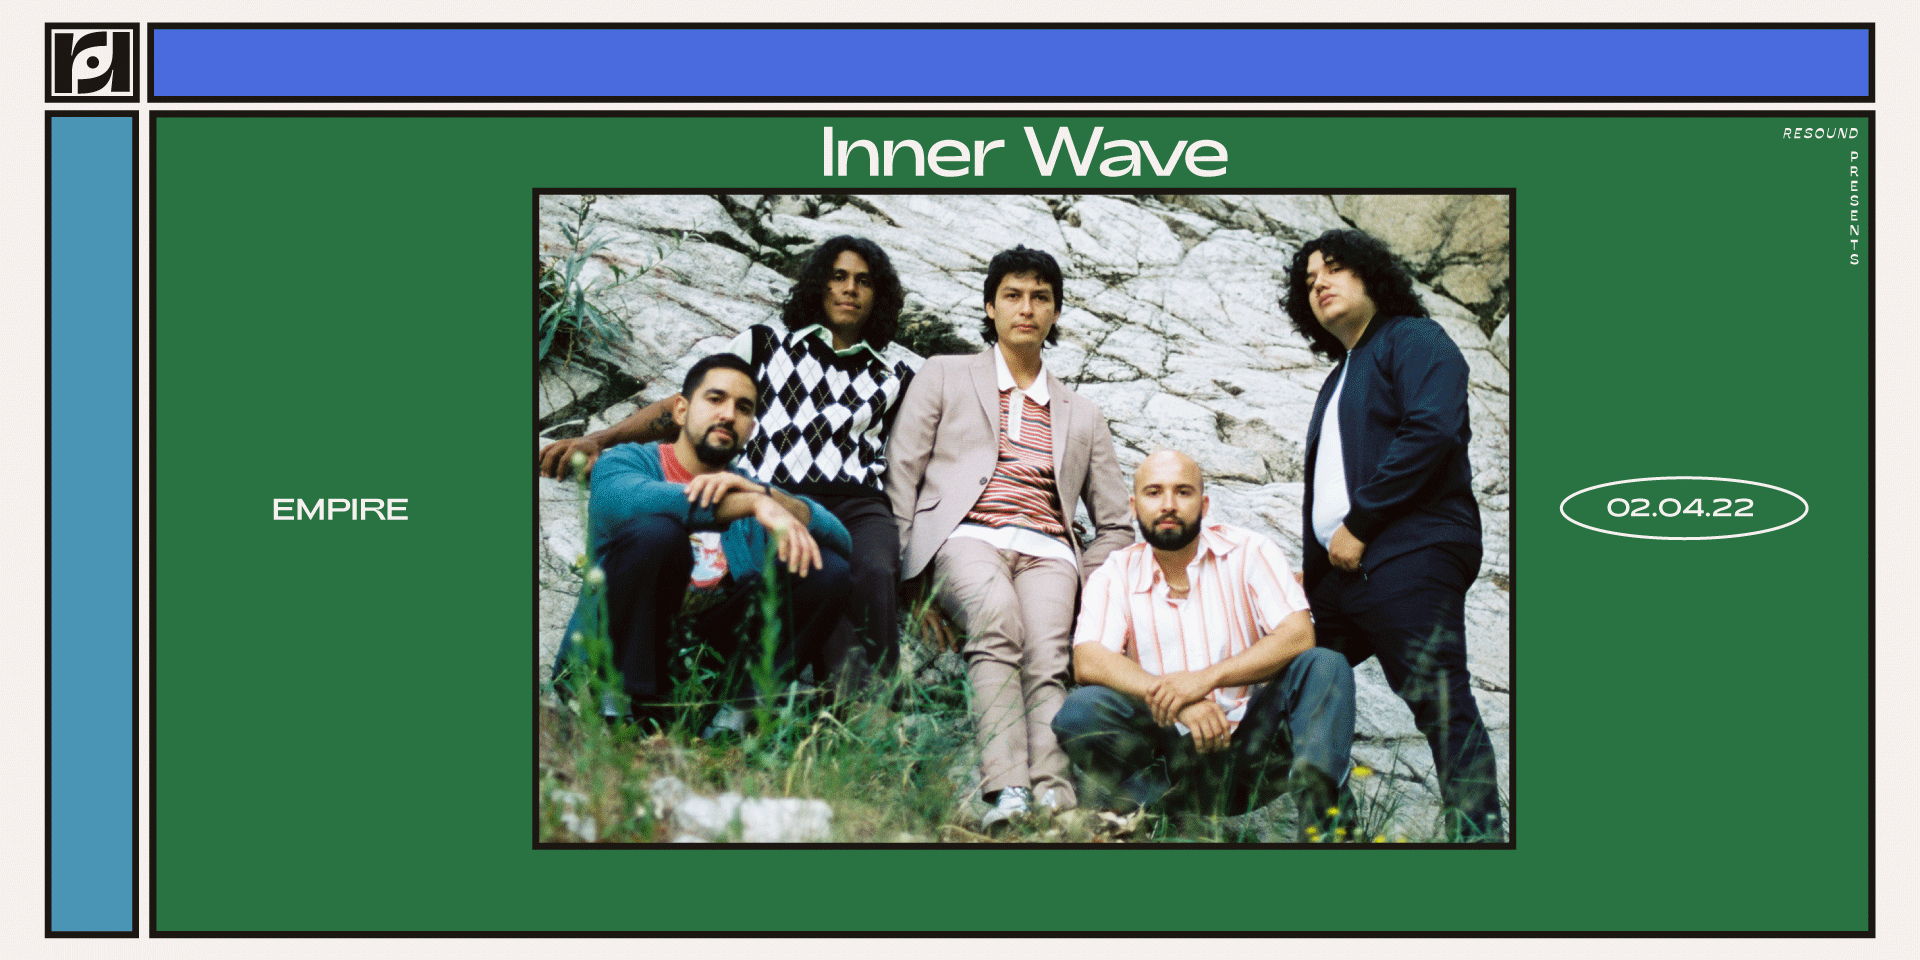 Inner Wave at Empire Control Room 2/4 promotional image